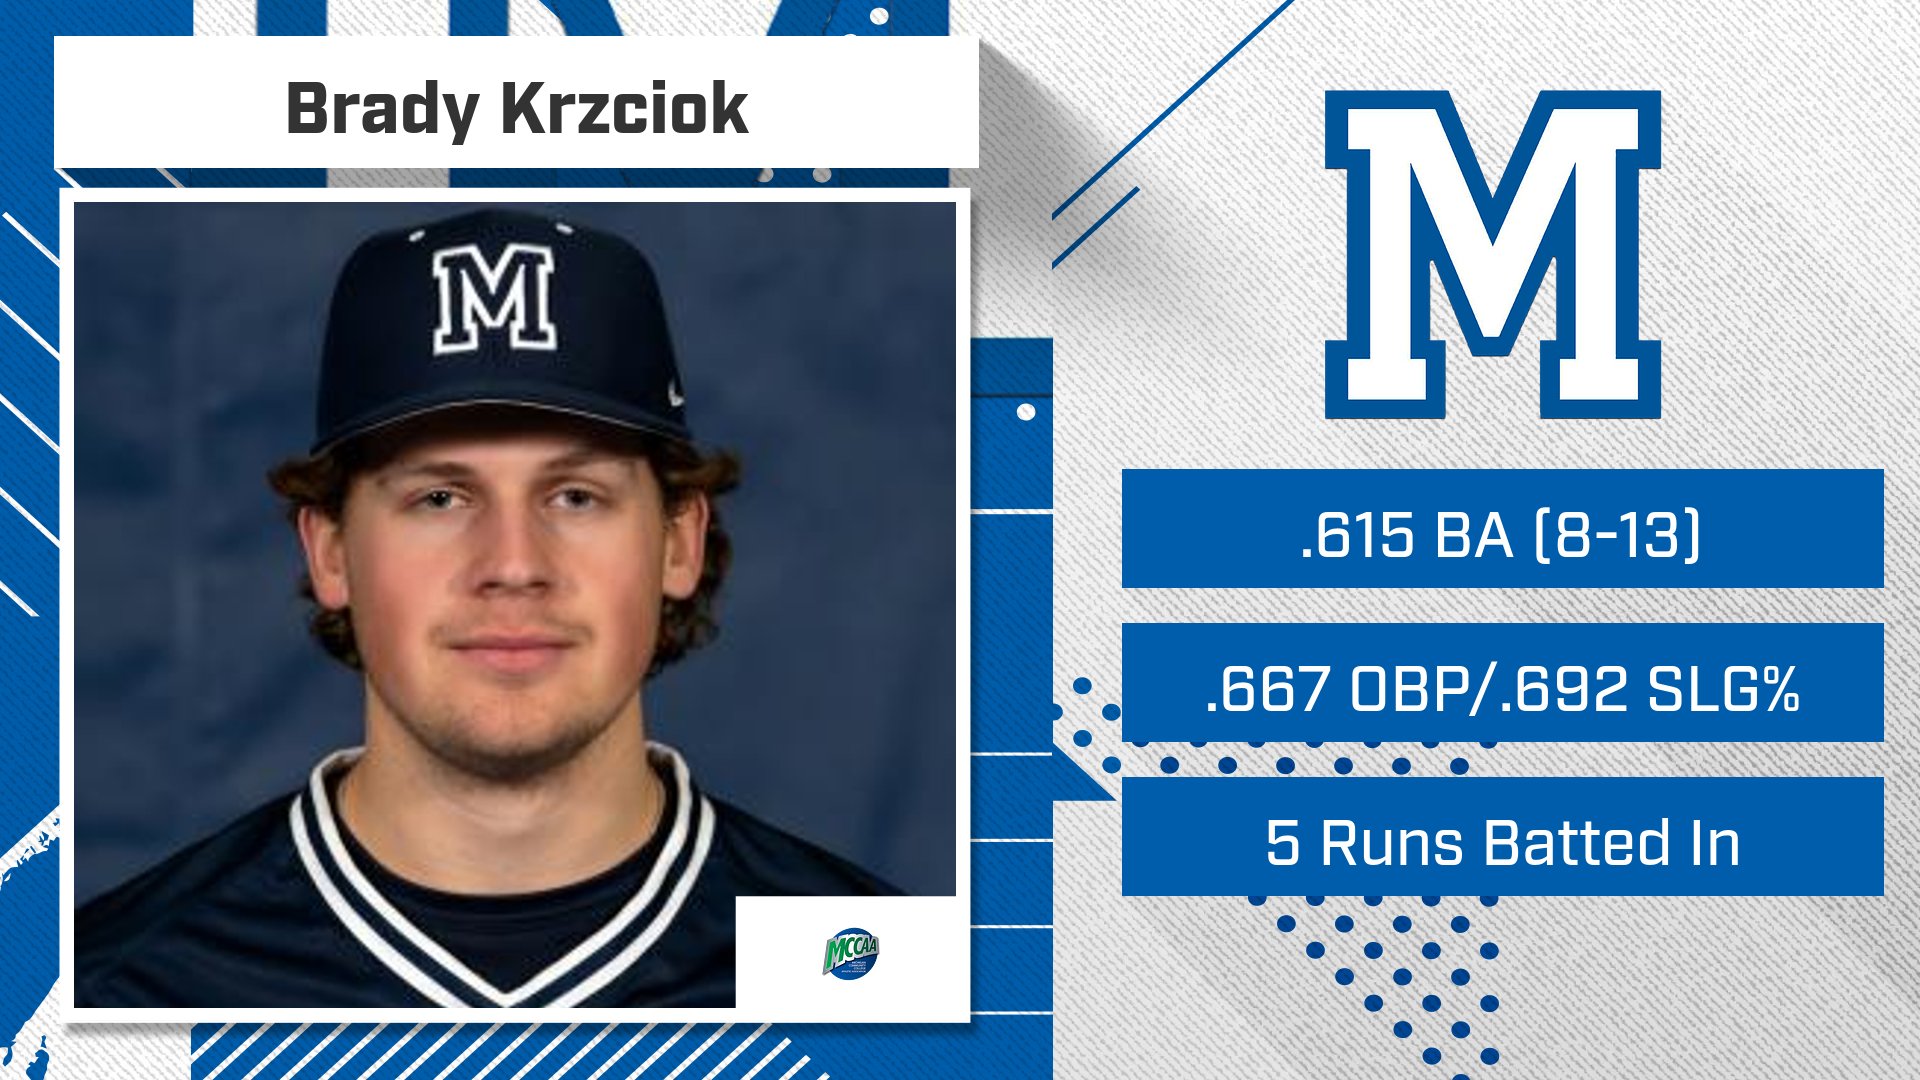 Macomb's Krzciok is the MCCAA Eastern Conference Baseball Player of the Week2